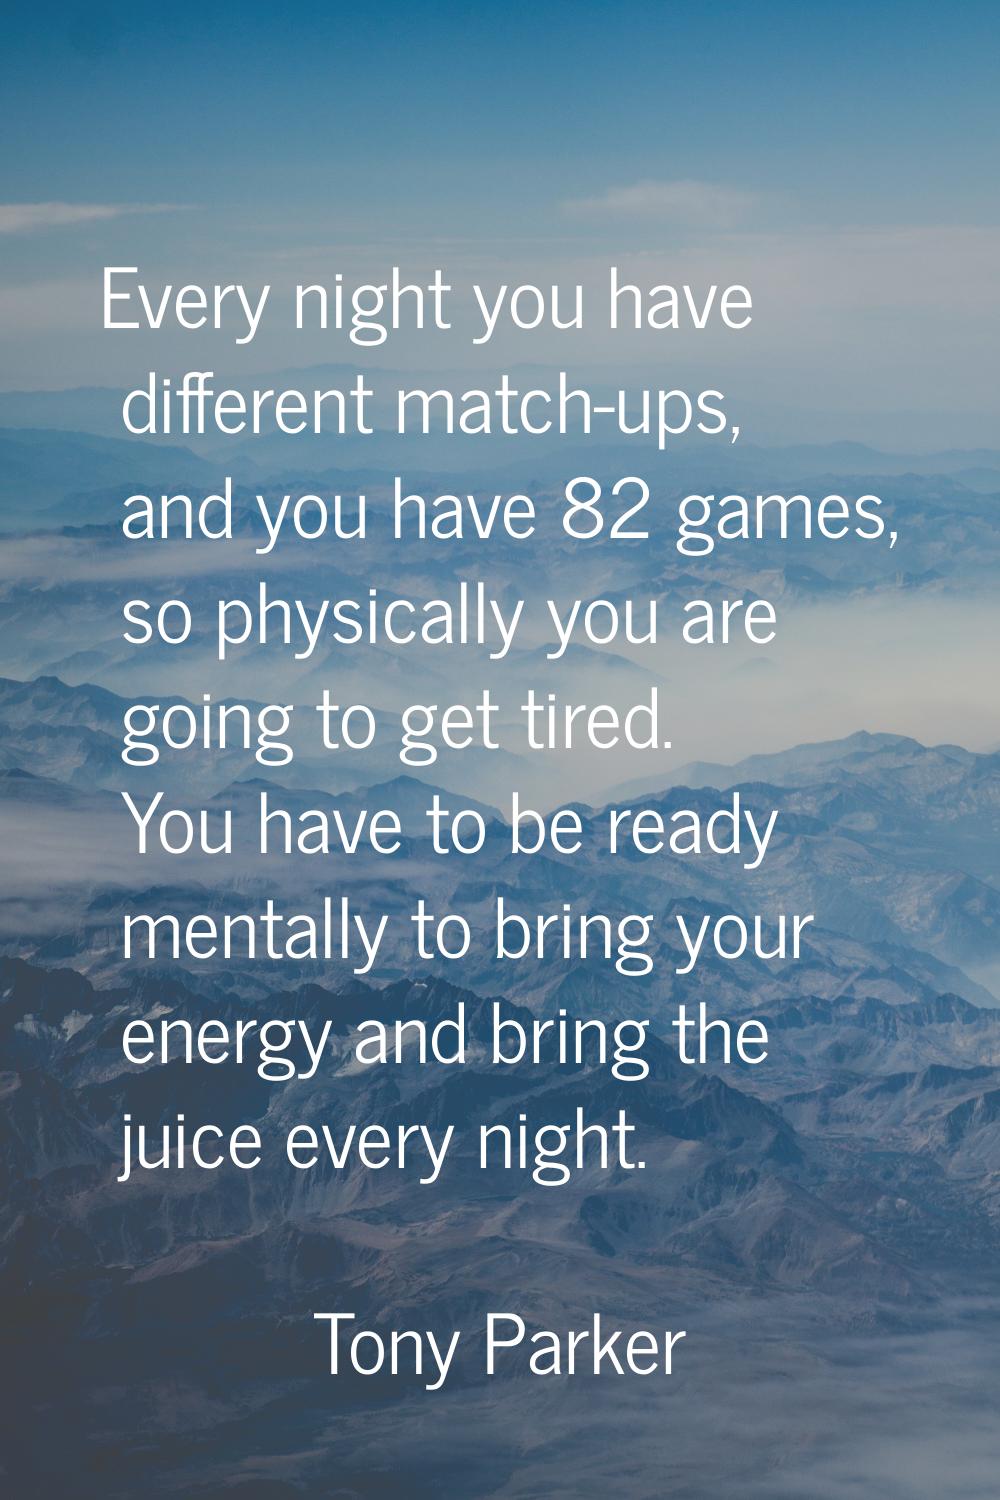 Every night you have different match-ups, and you have 82 games, so physically you are going to get